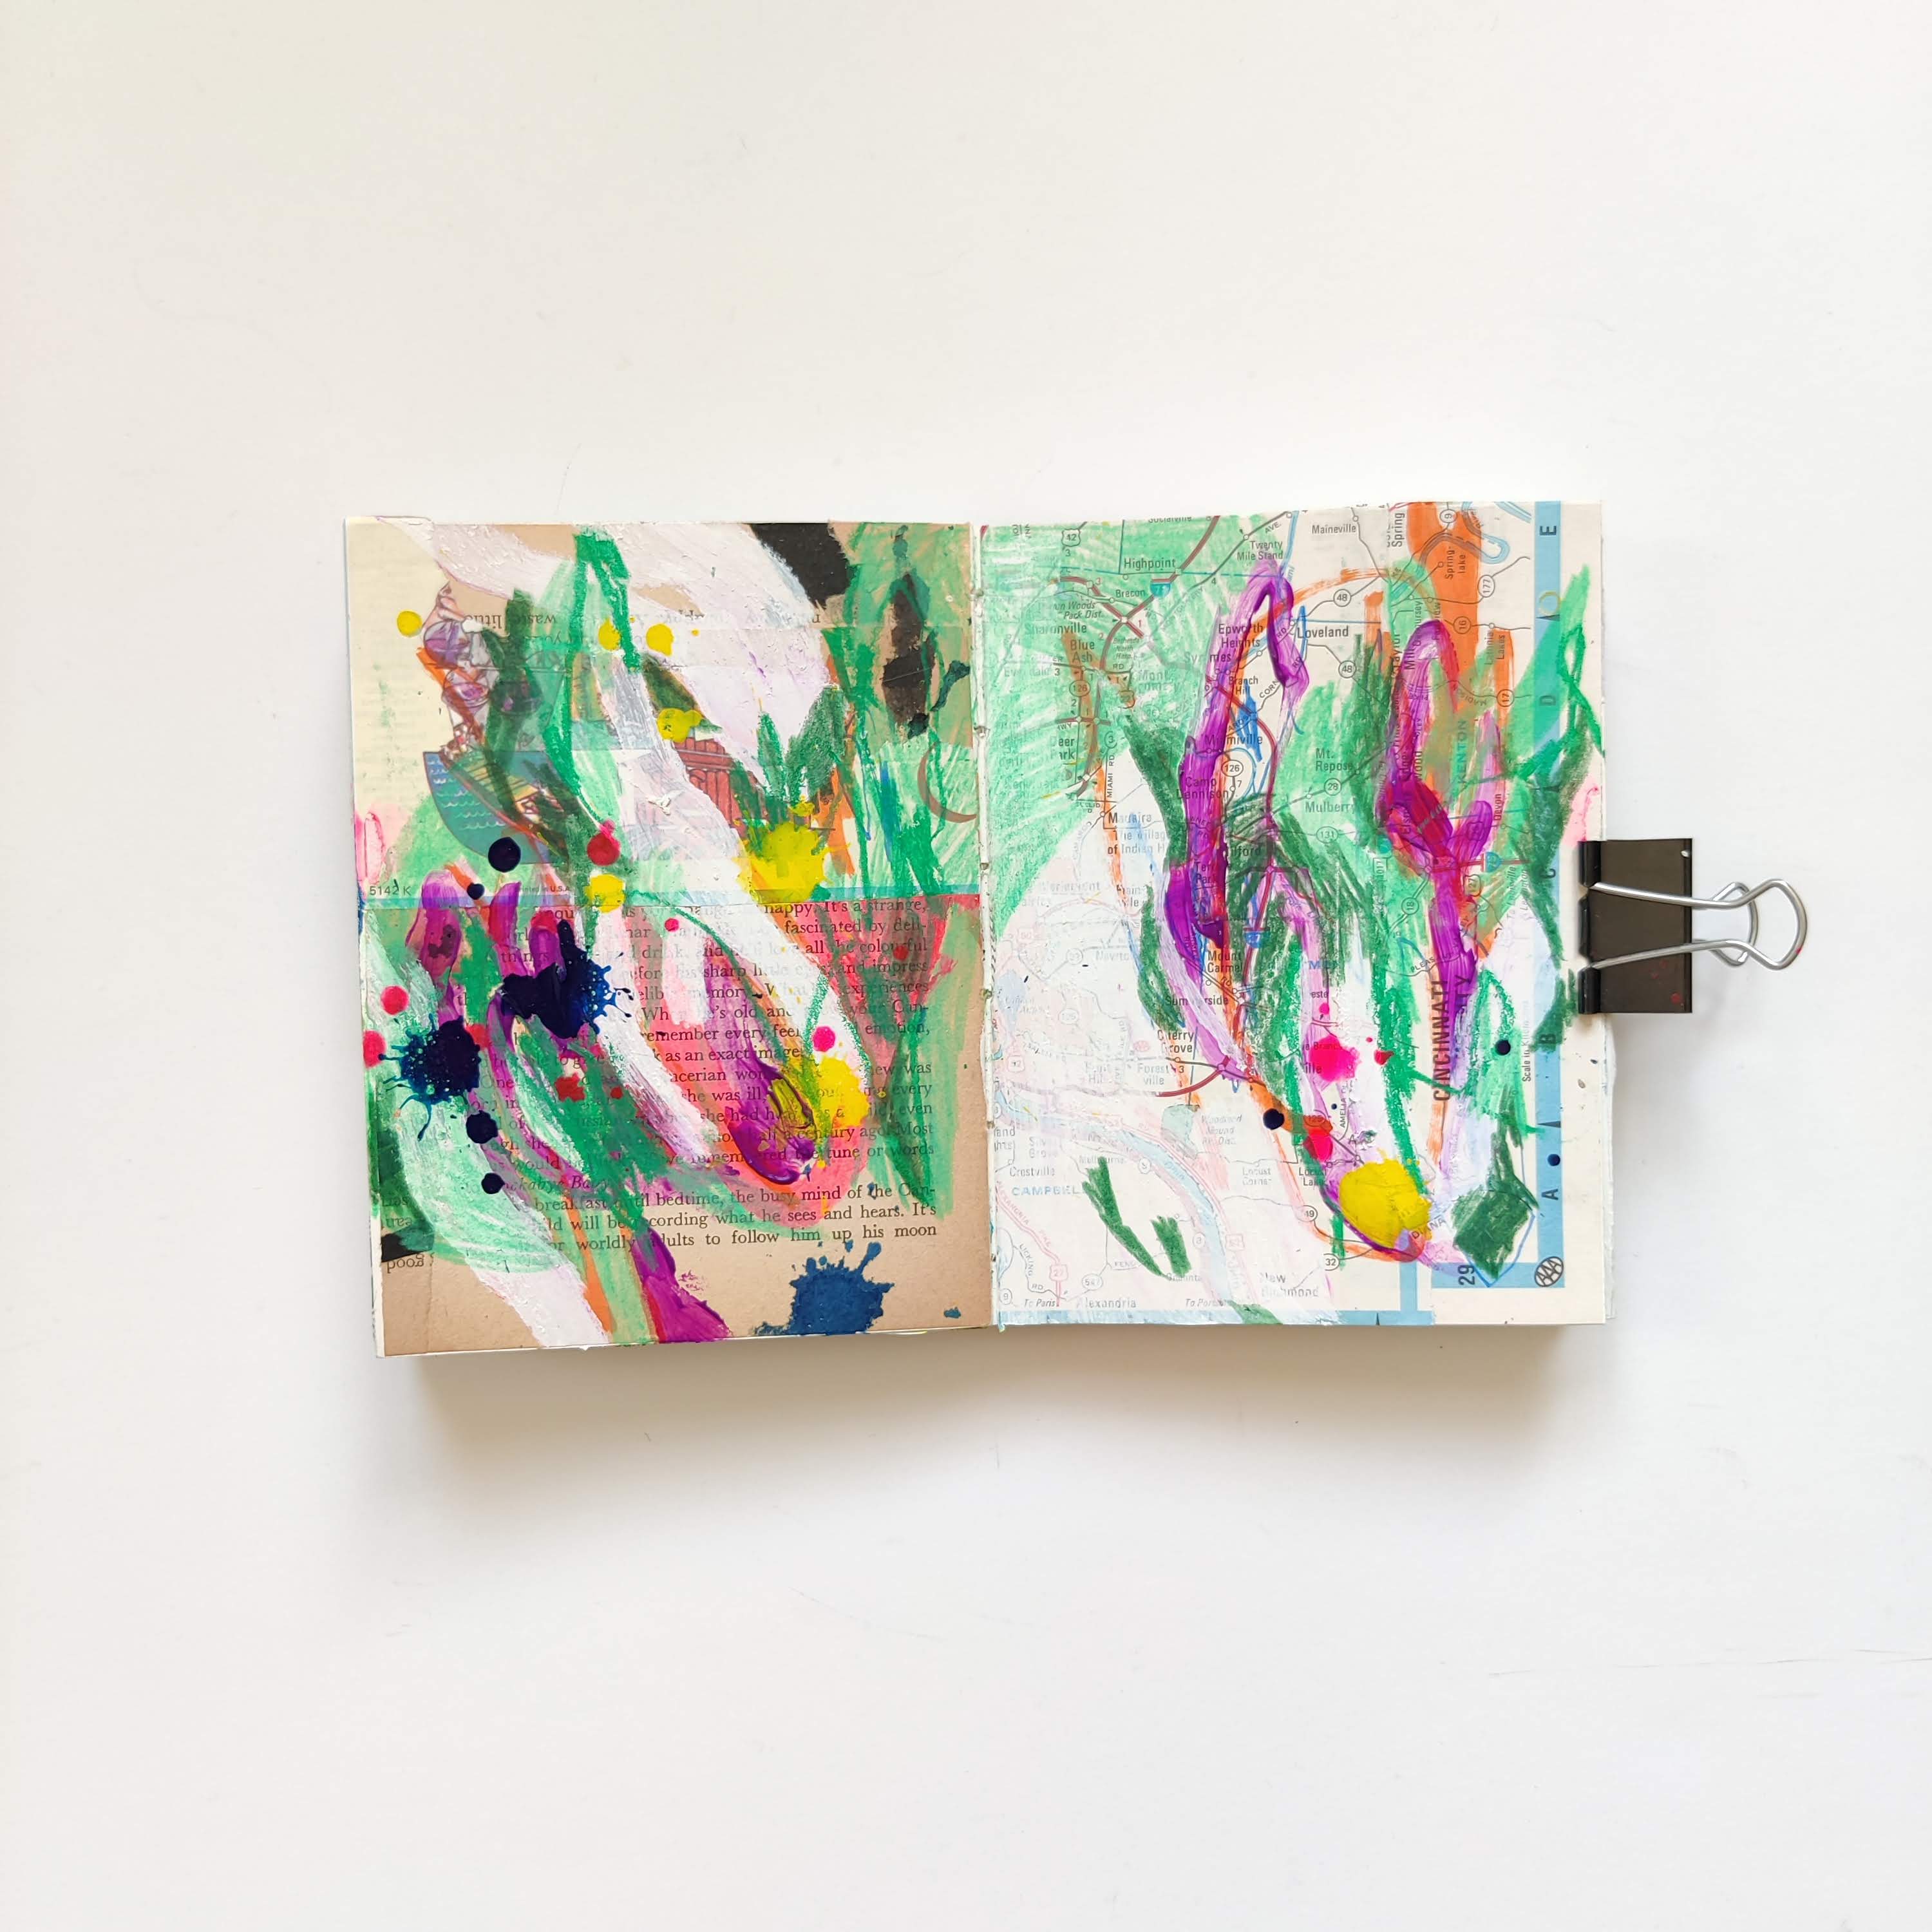 Ingrid Murray mixed media art journal. A neutral background of vintage book and atlas papers, and abstract white green, purple, orange, dark blue, and yellow marks made with tempera paint, oil pastel, colored pencil, and acrylic ink.